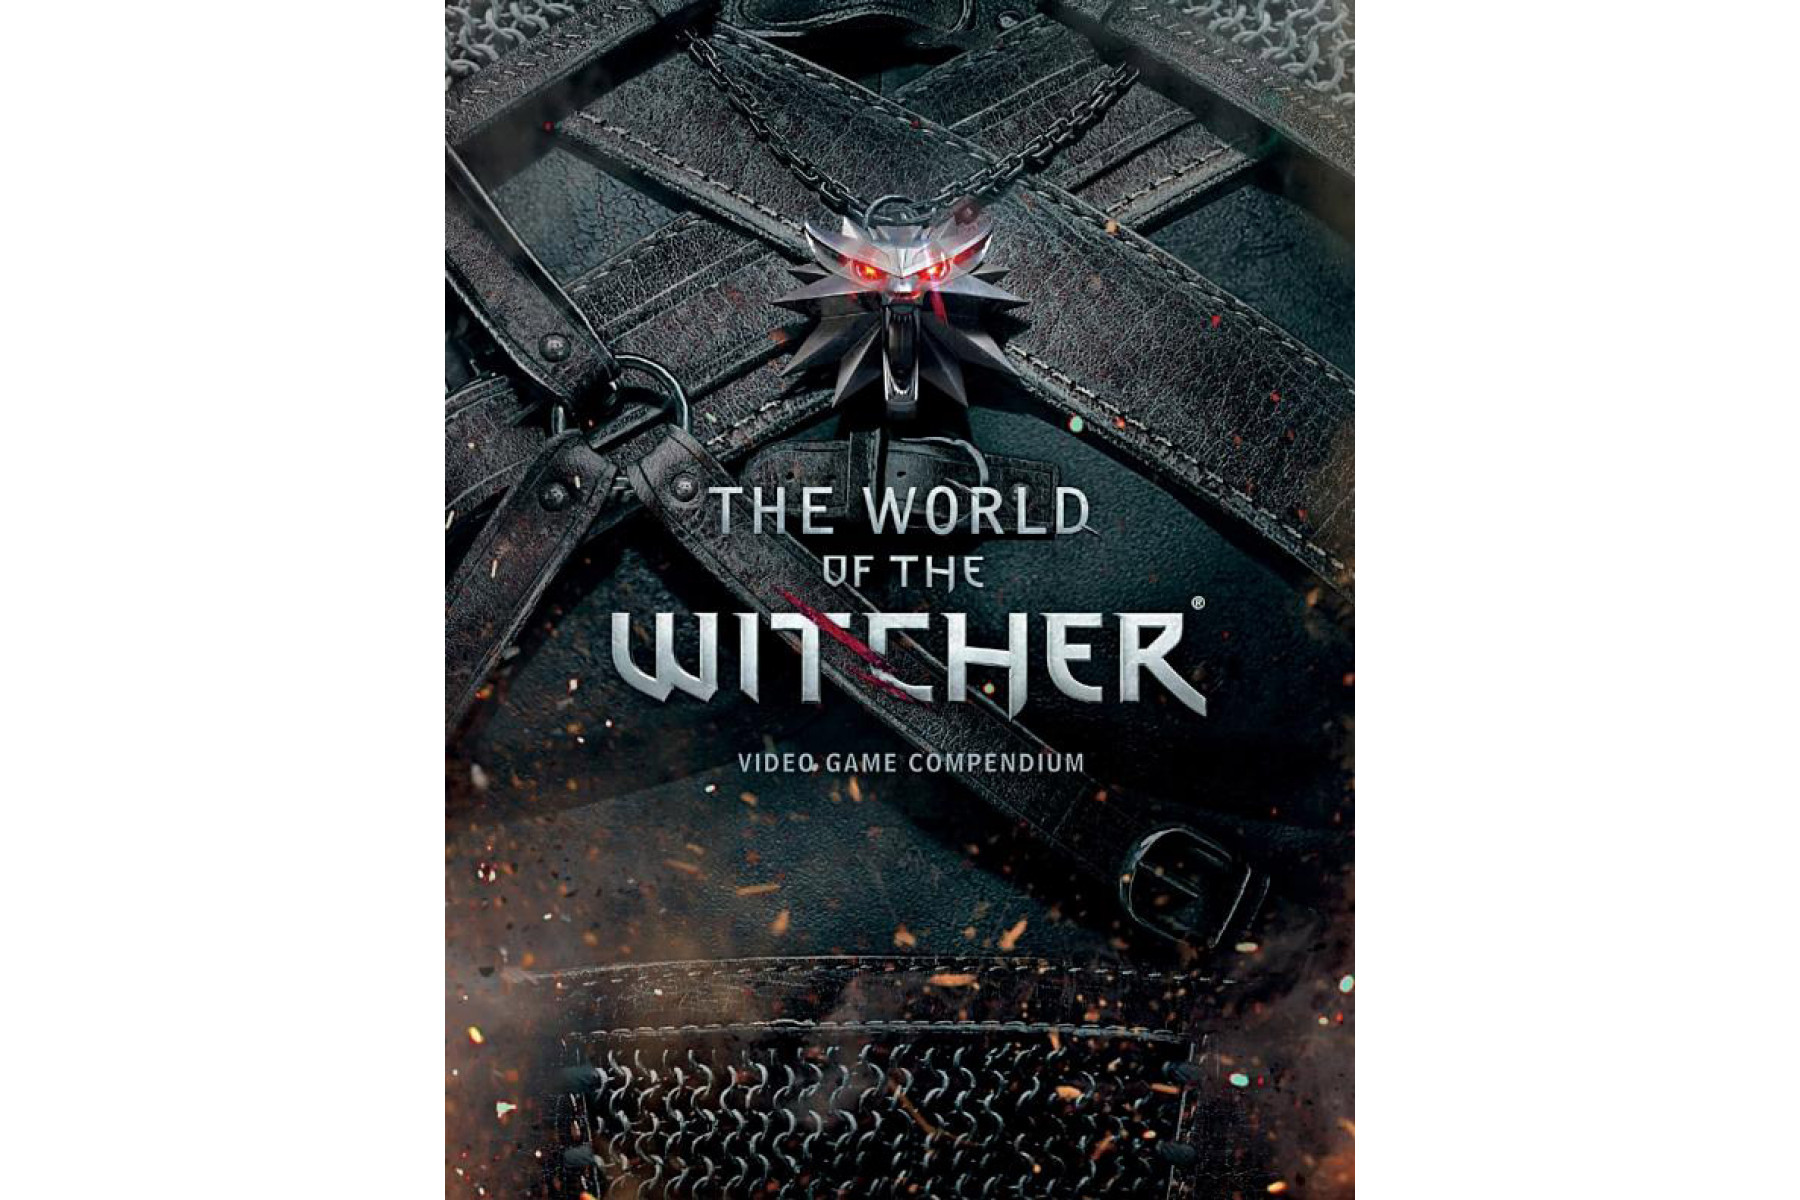 World of the Witcher, The